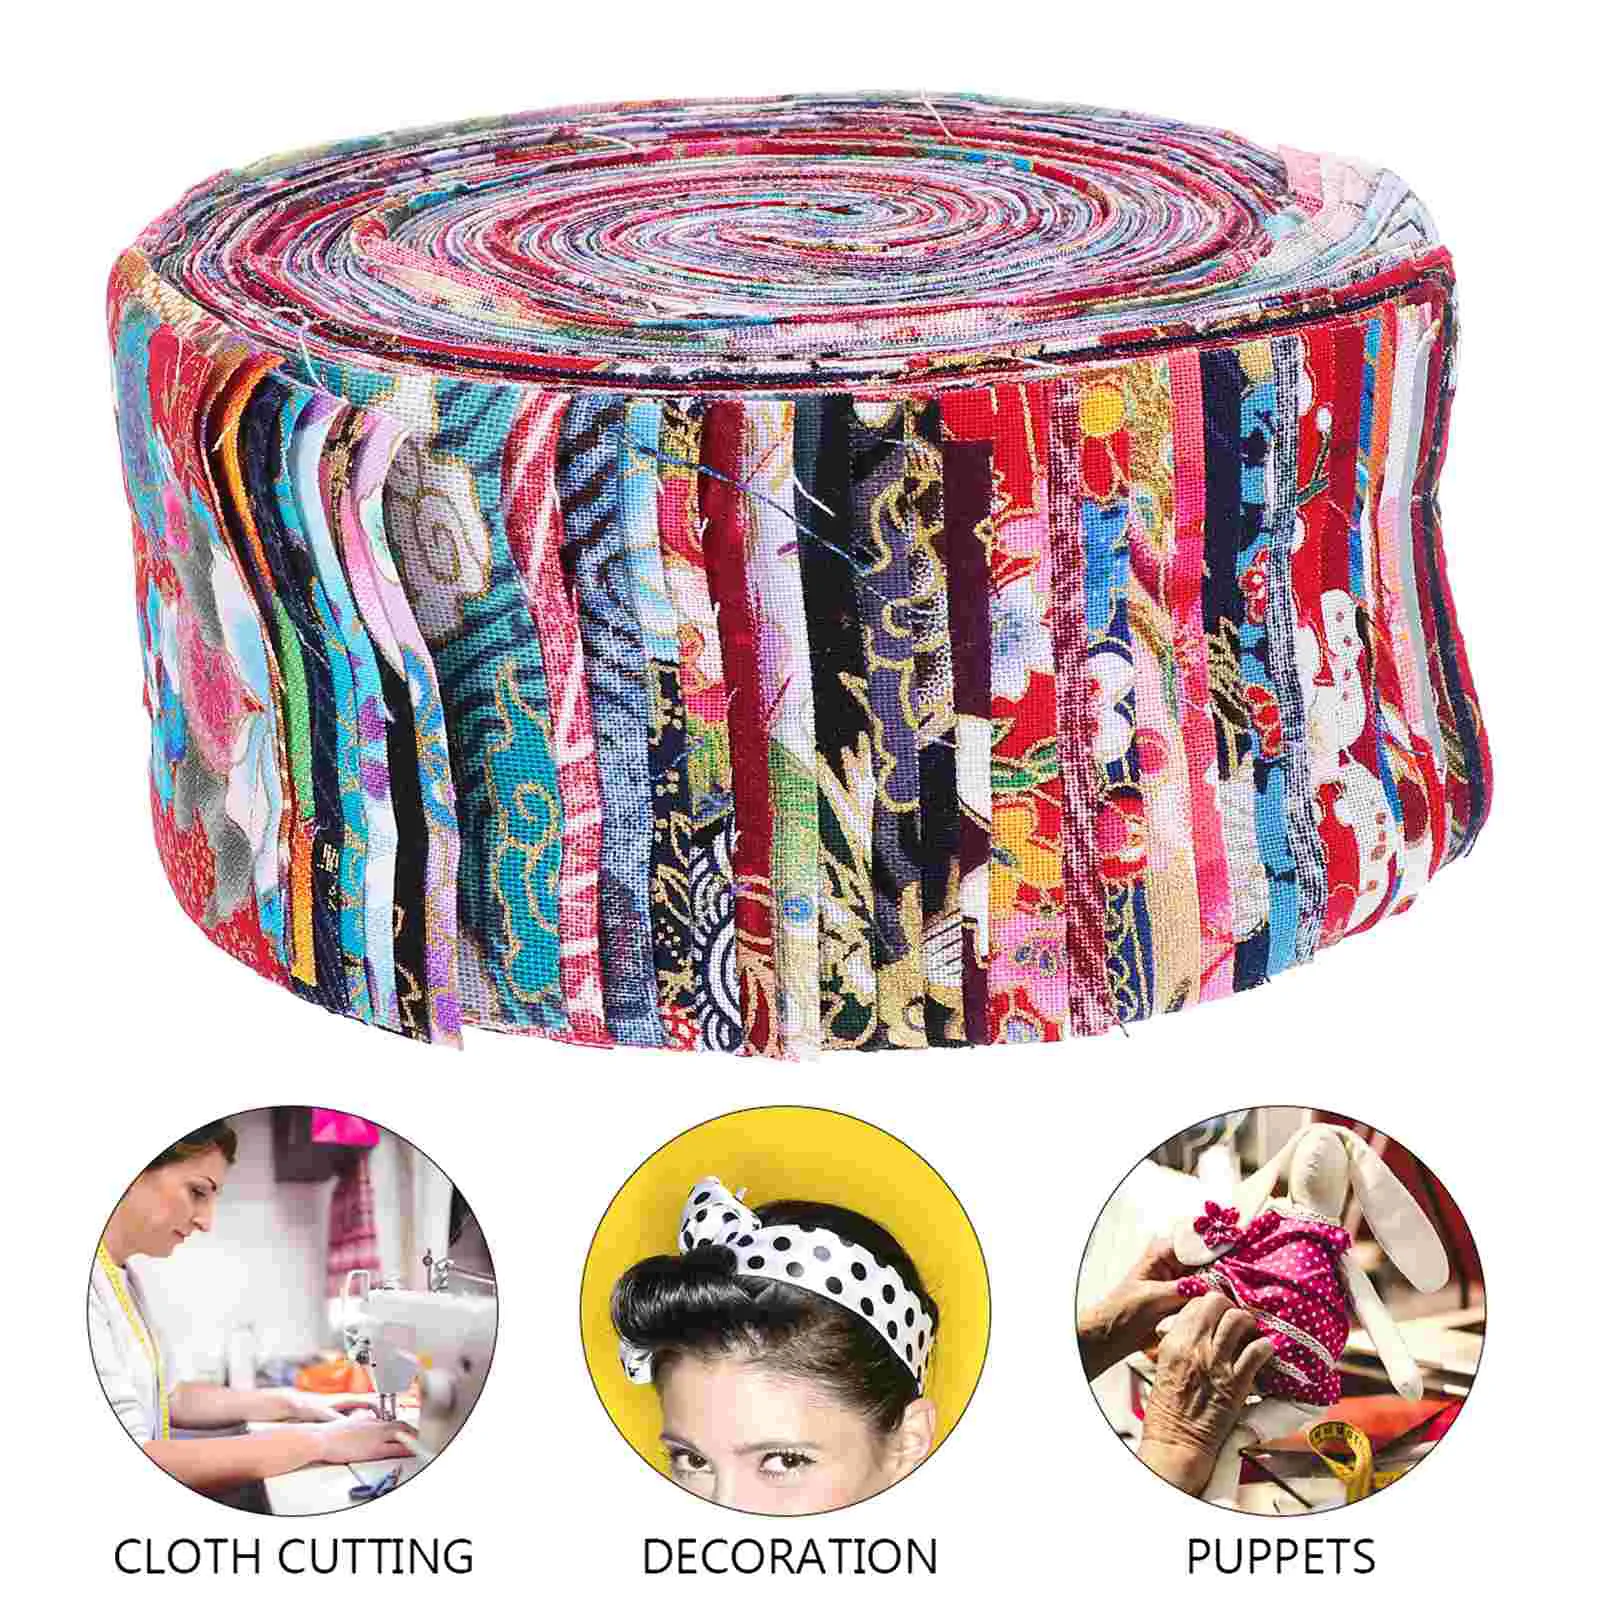 

36 Pcs Roll Cotton Fabric Handmade Gifts Quilting Squares Patchwork Cloth Sheets Vintage Craft Rool Sewing Bundle Japanese